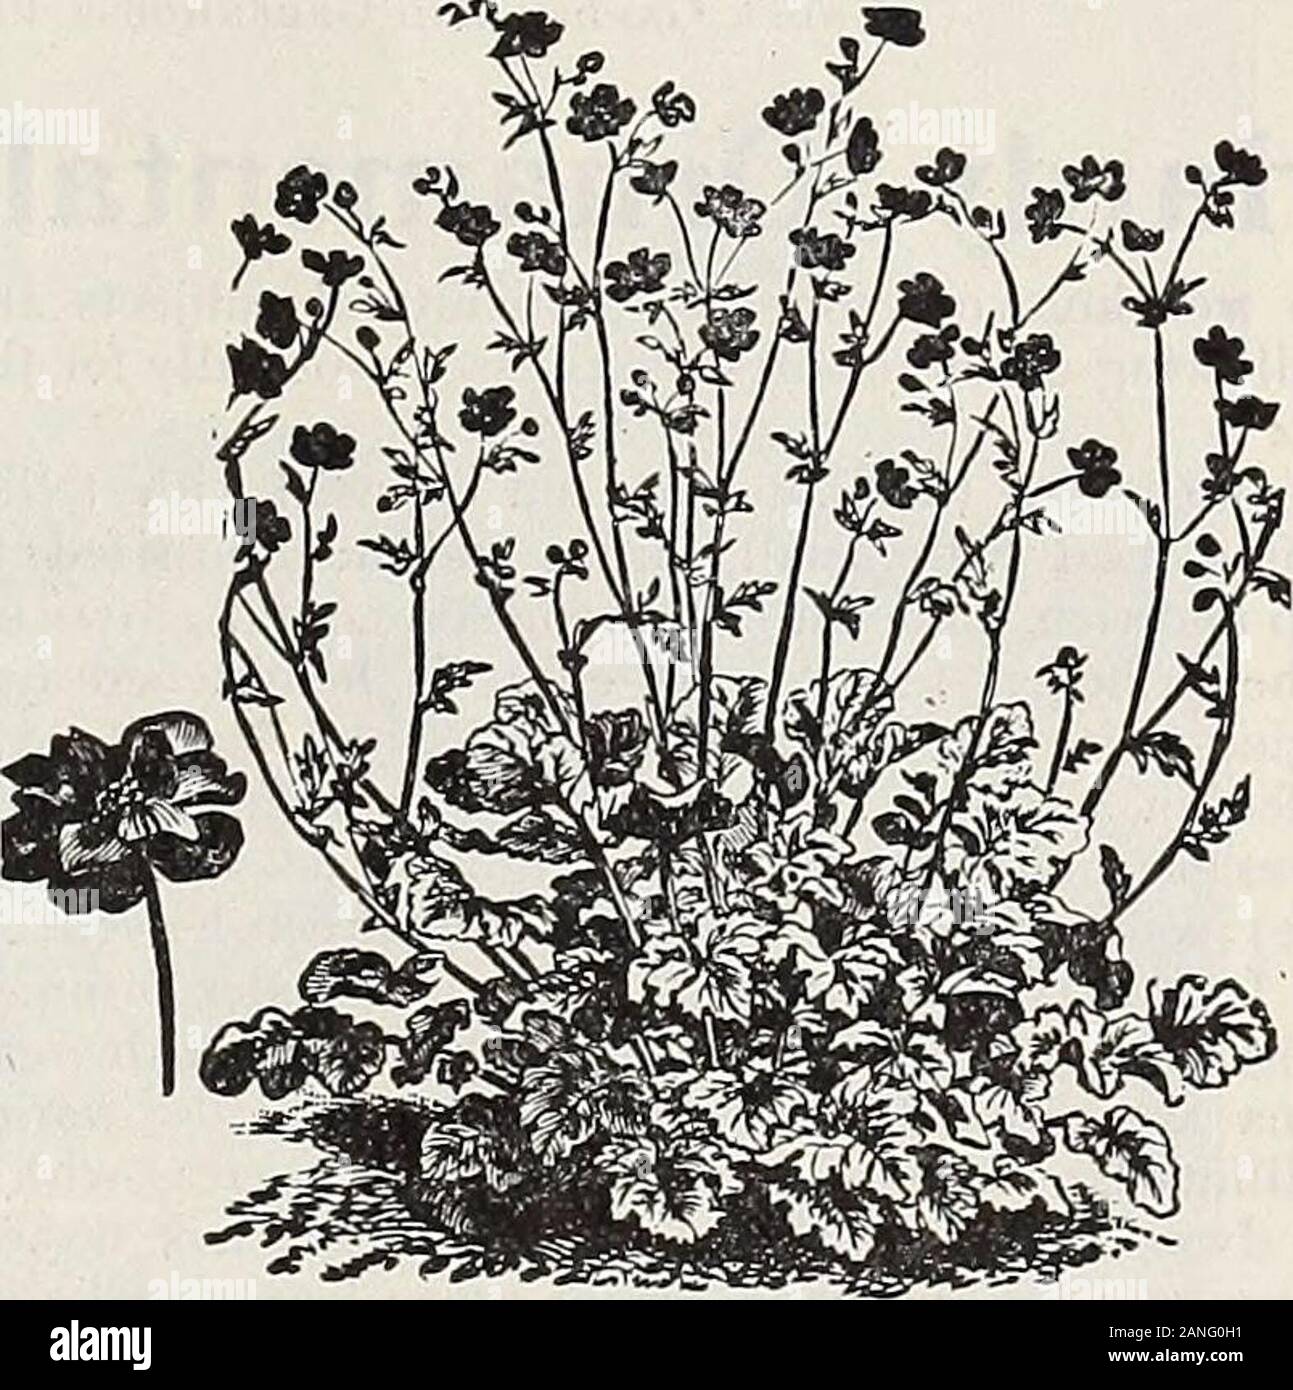 Dreer's 72nd annual edition garden book : 1910 . this shape.Acutifolia. A strong-growing kind, attaining a height of 2 feet, with largepanicles of small white flowers in July. Cerastioides. A most use-ful variety for the rockery,growing but 3 inches high,and producing from June toAugust small white flowersmarked with pink.Paniculata. A beautiful old-fashioned plant, possessinga grace not found in anyother perennial. When inbloom during August andSeptember, it forms a sym-metrical mass 2 to 3 feet inheight, and as much through,of minute pure white flow-e r s, forming a beautifulgauze-like appea Stock Photo